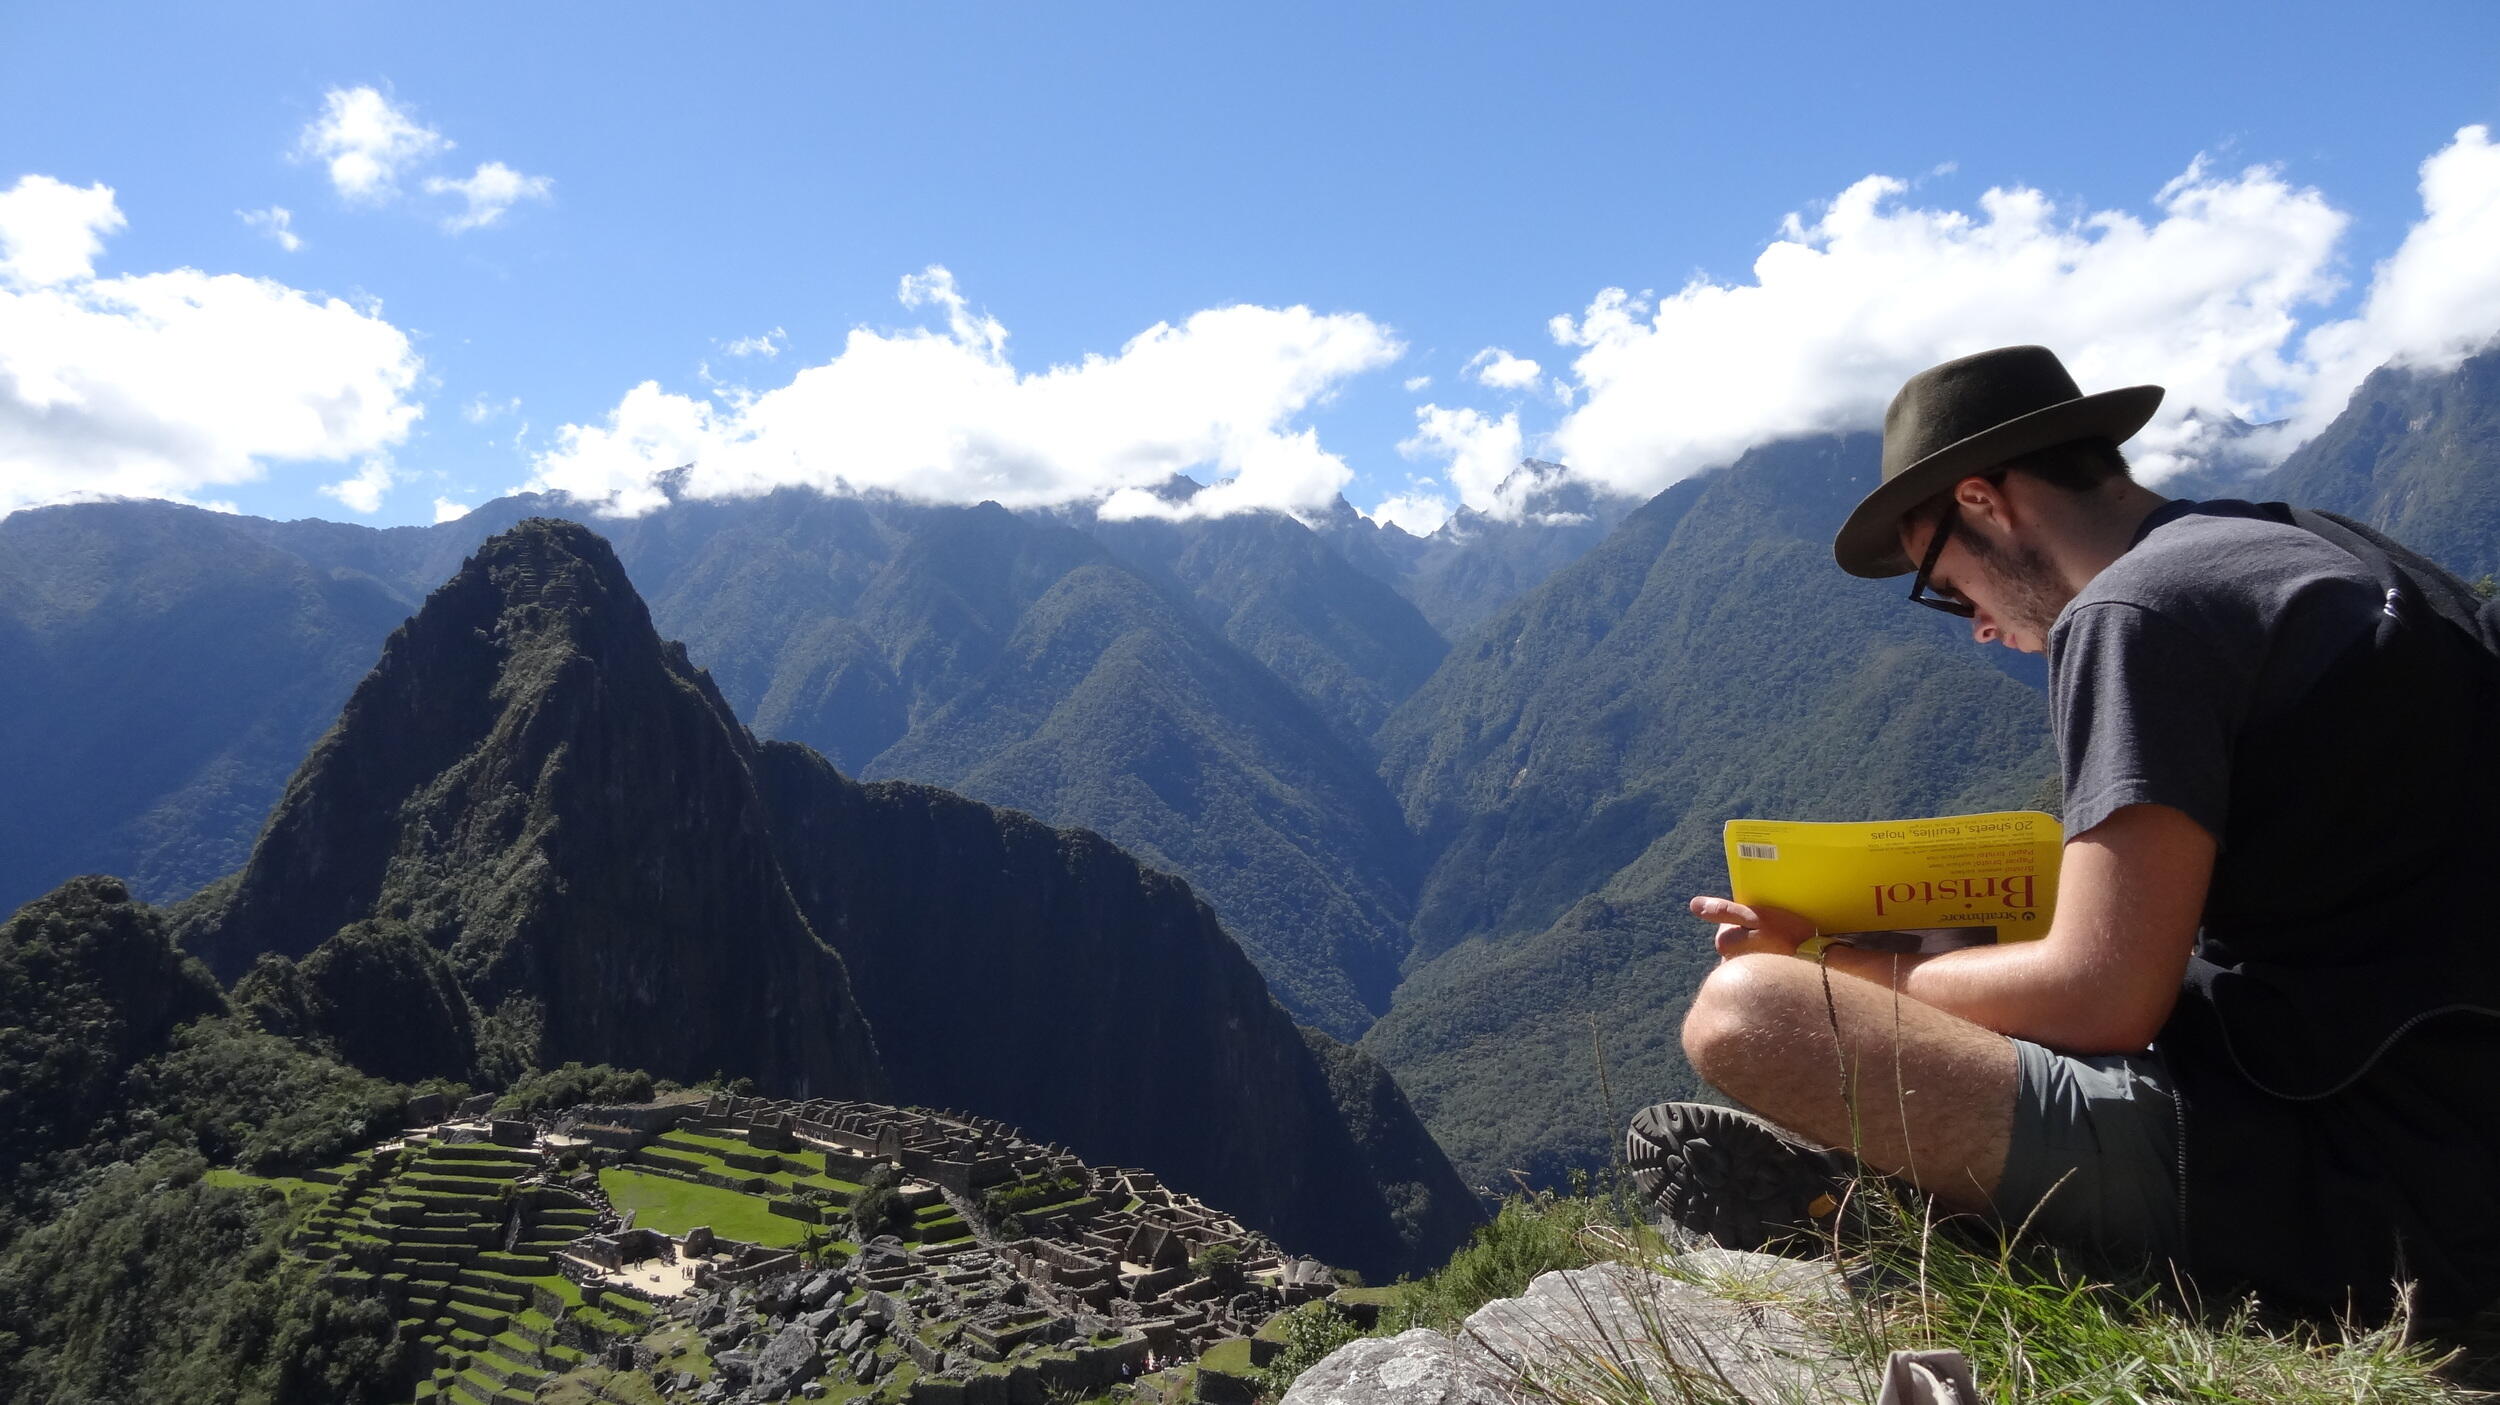 For 20 years, VCU students have benefited from the transformative experience of studying abroad in places such as Peru. Photo by Scott DuPre Mills, Ph.D.